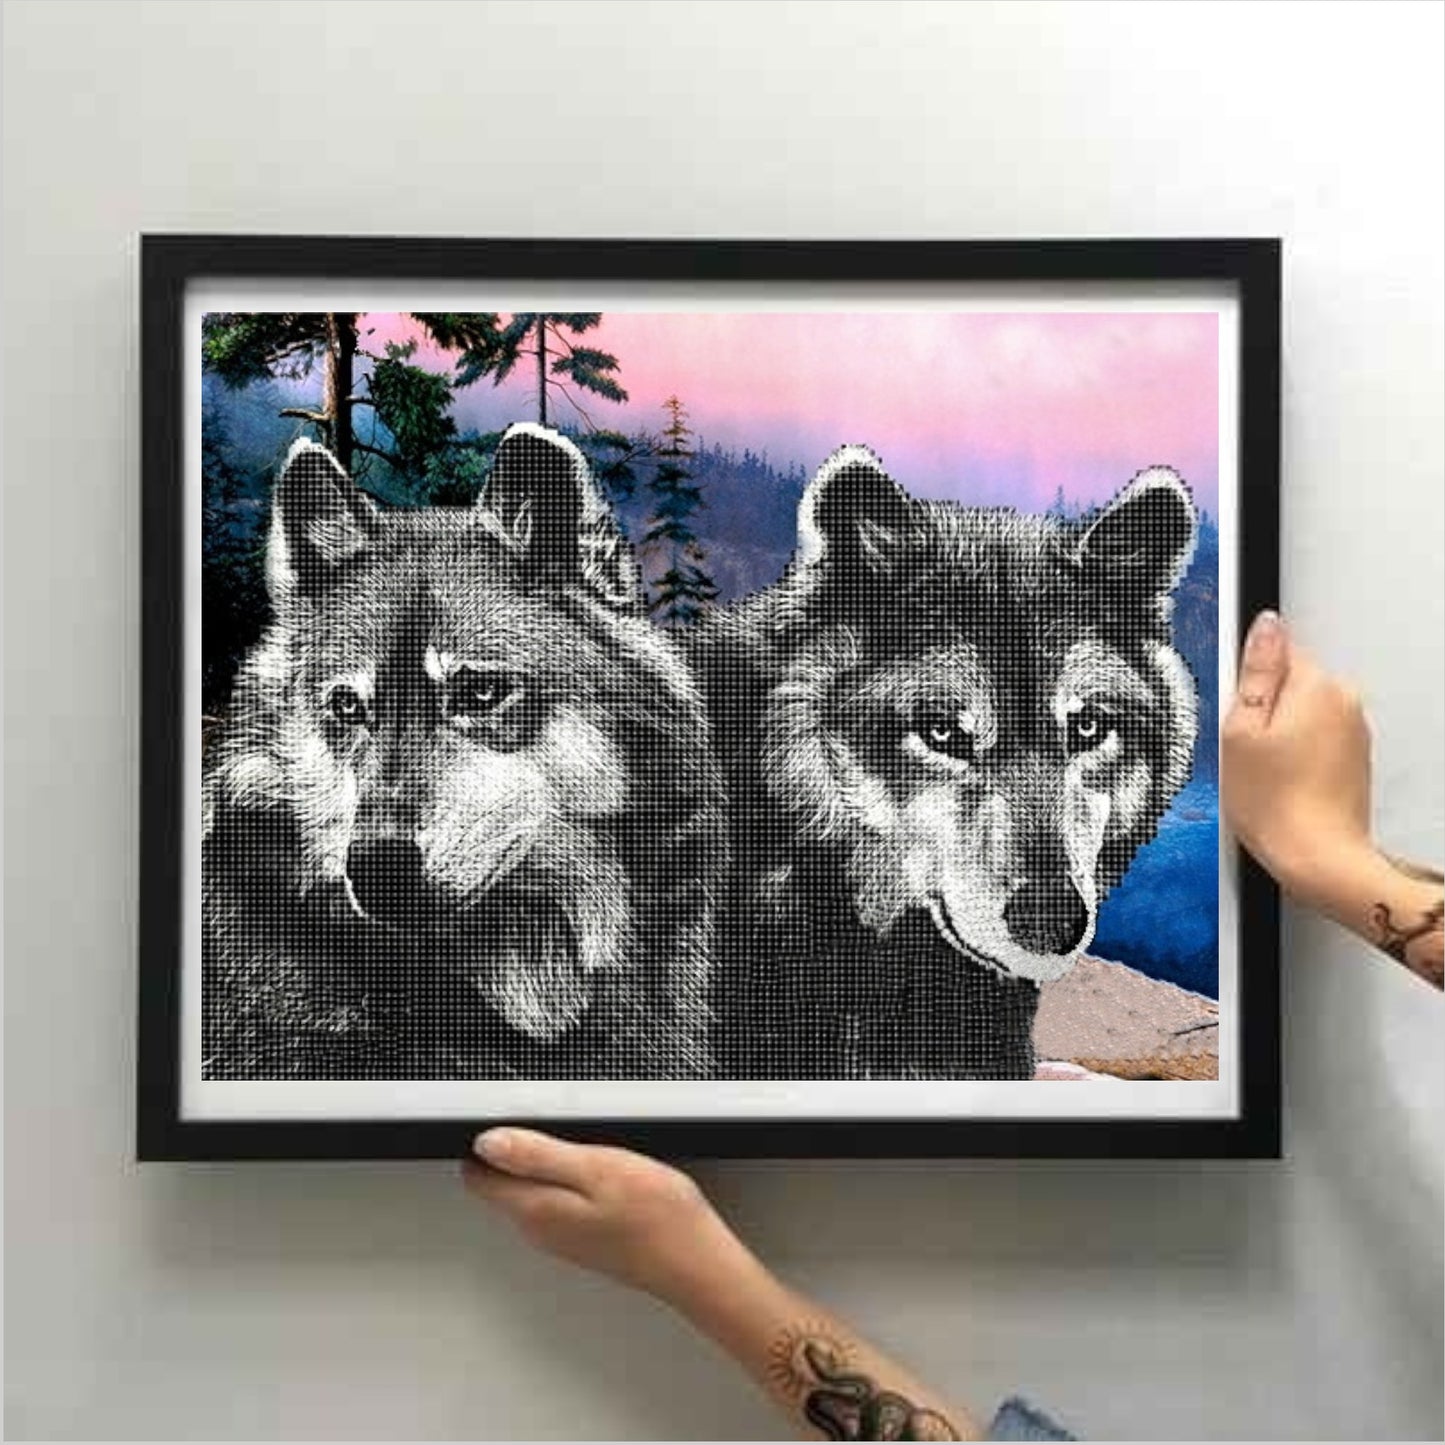 DIY Bead embroidery kit "Wolves". Size: 15.7-11.8" (40-30cm) - VadymShop